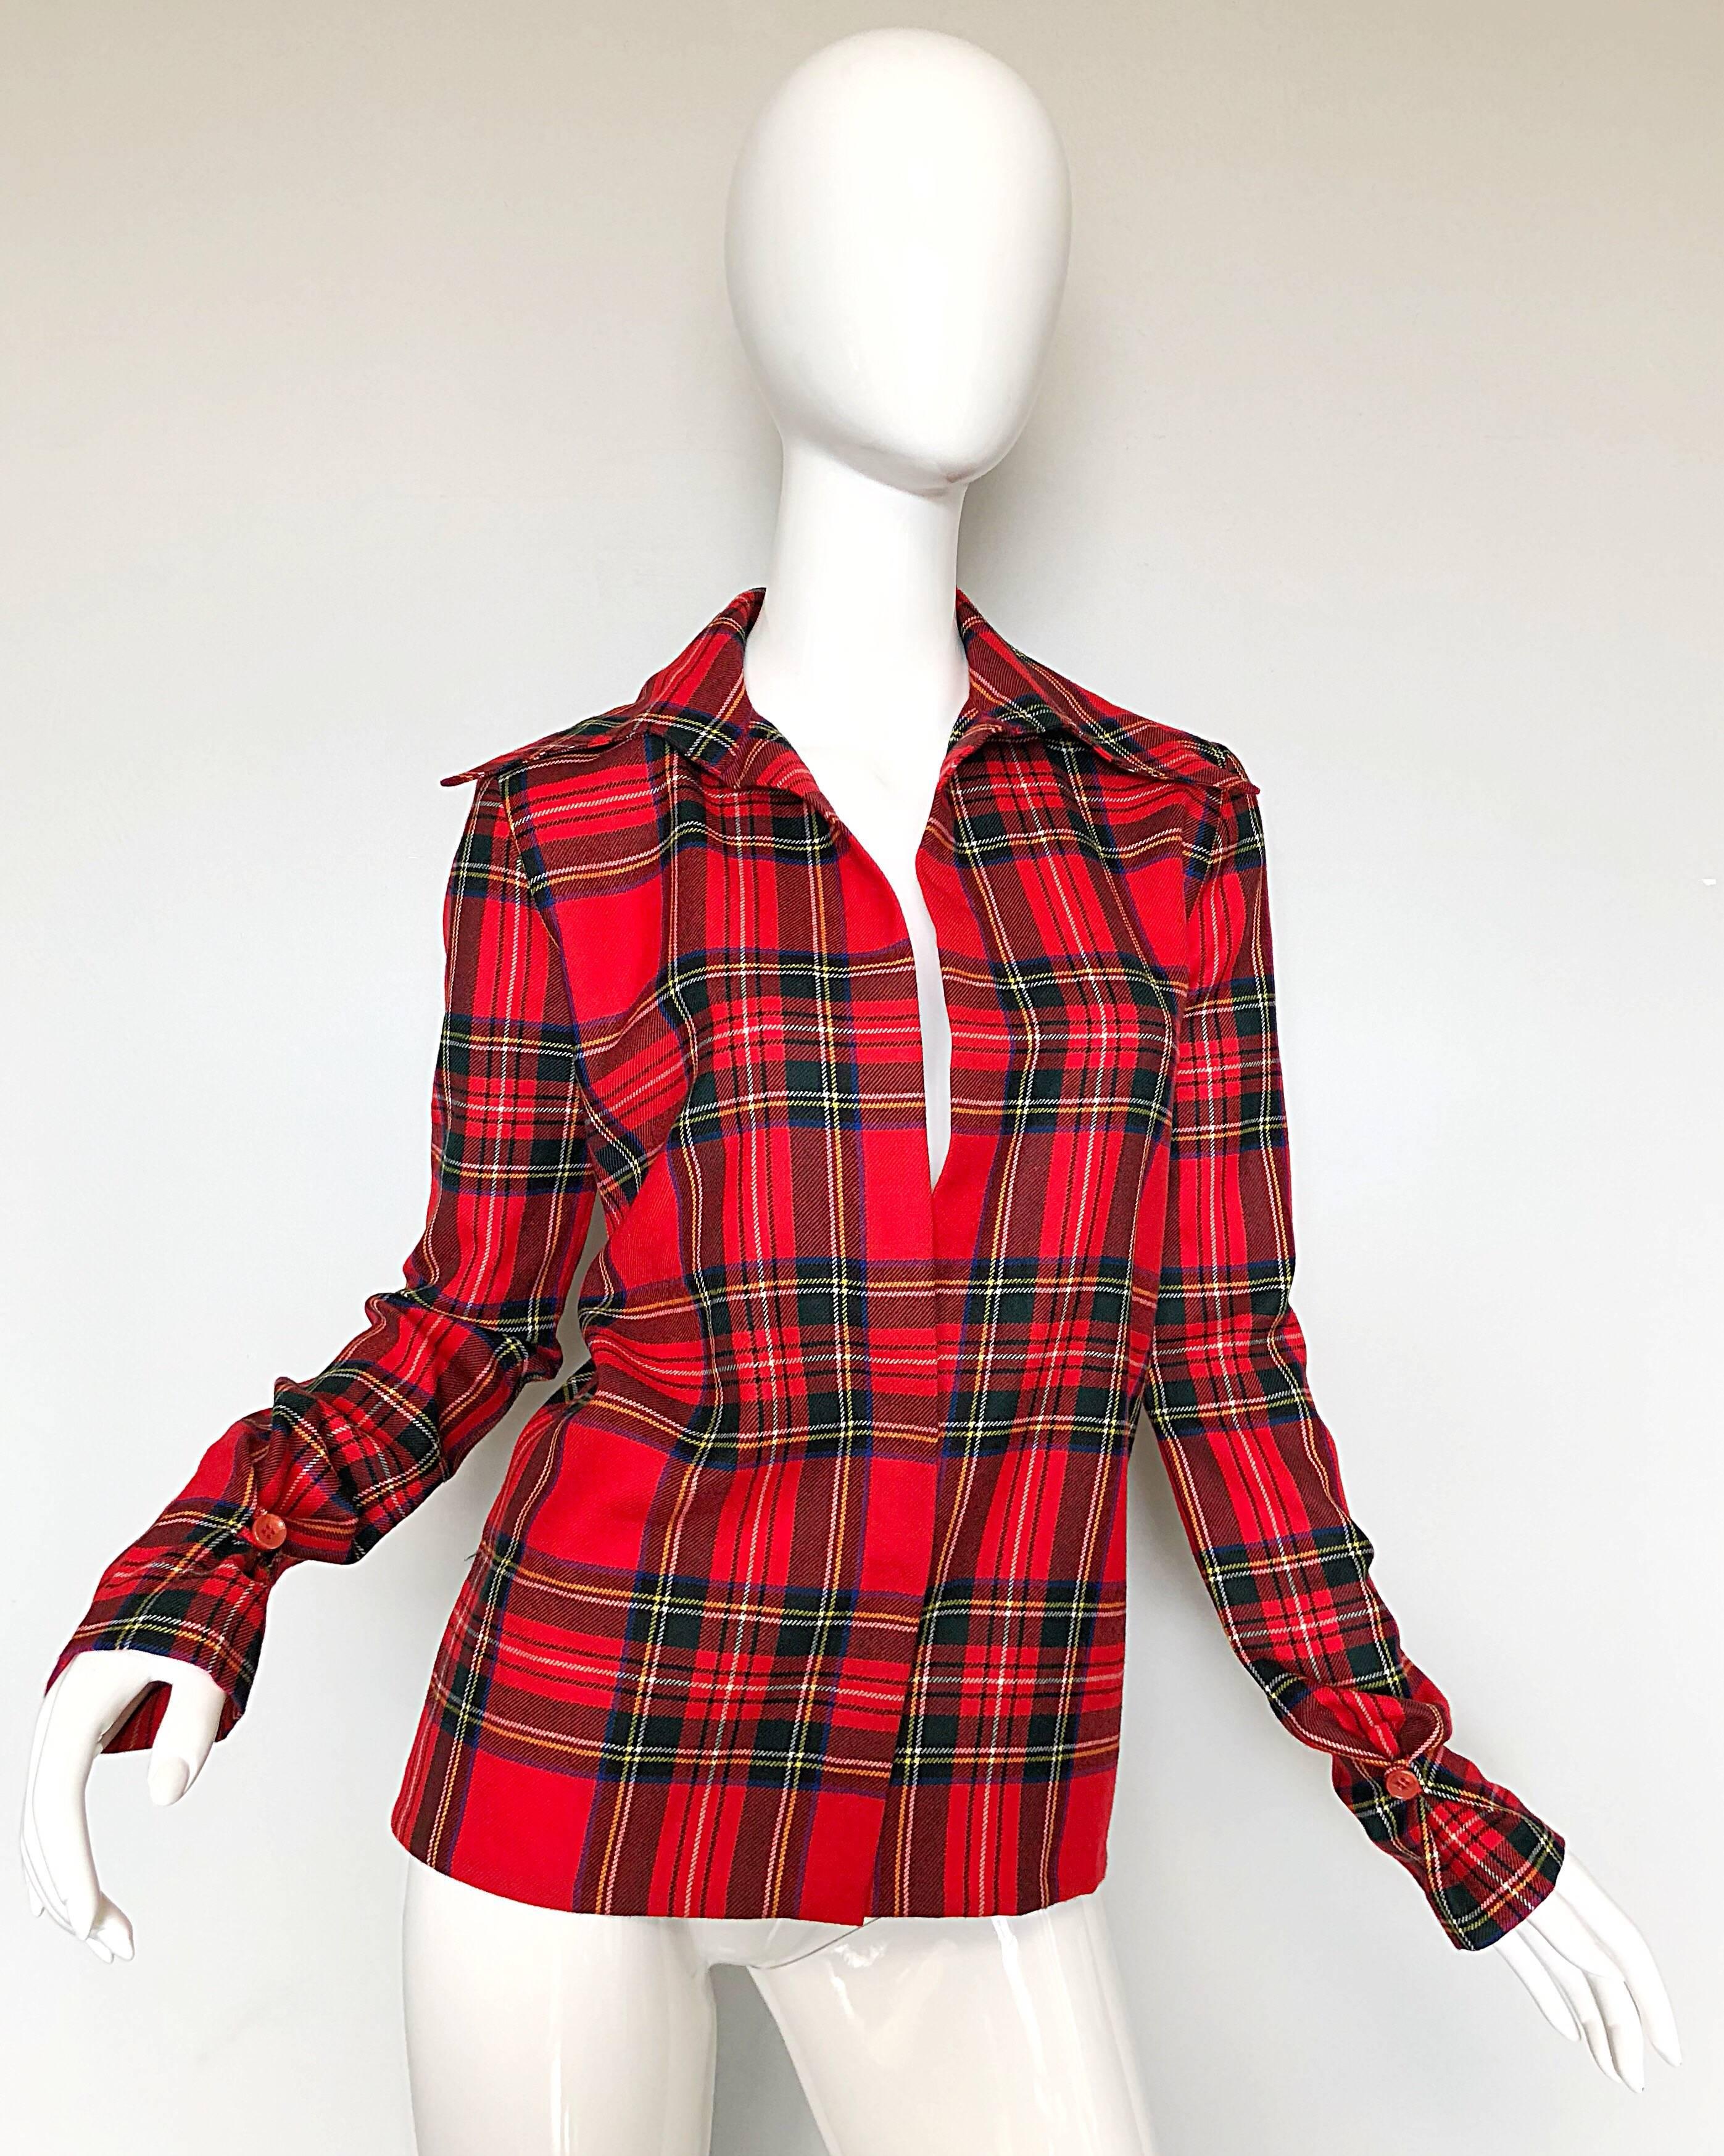 Dolce & Gabbana 1990s Red Tartan Plaid Virgin Wool 90s Plunging Flannel Shirt For Sale 2